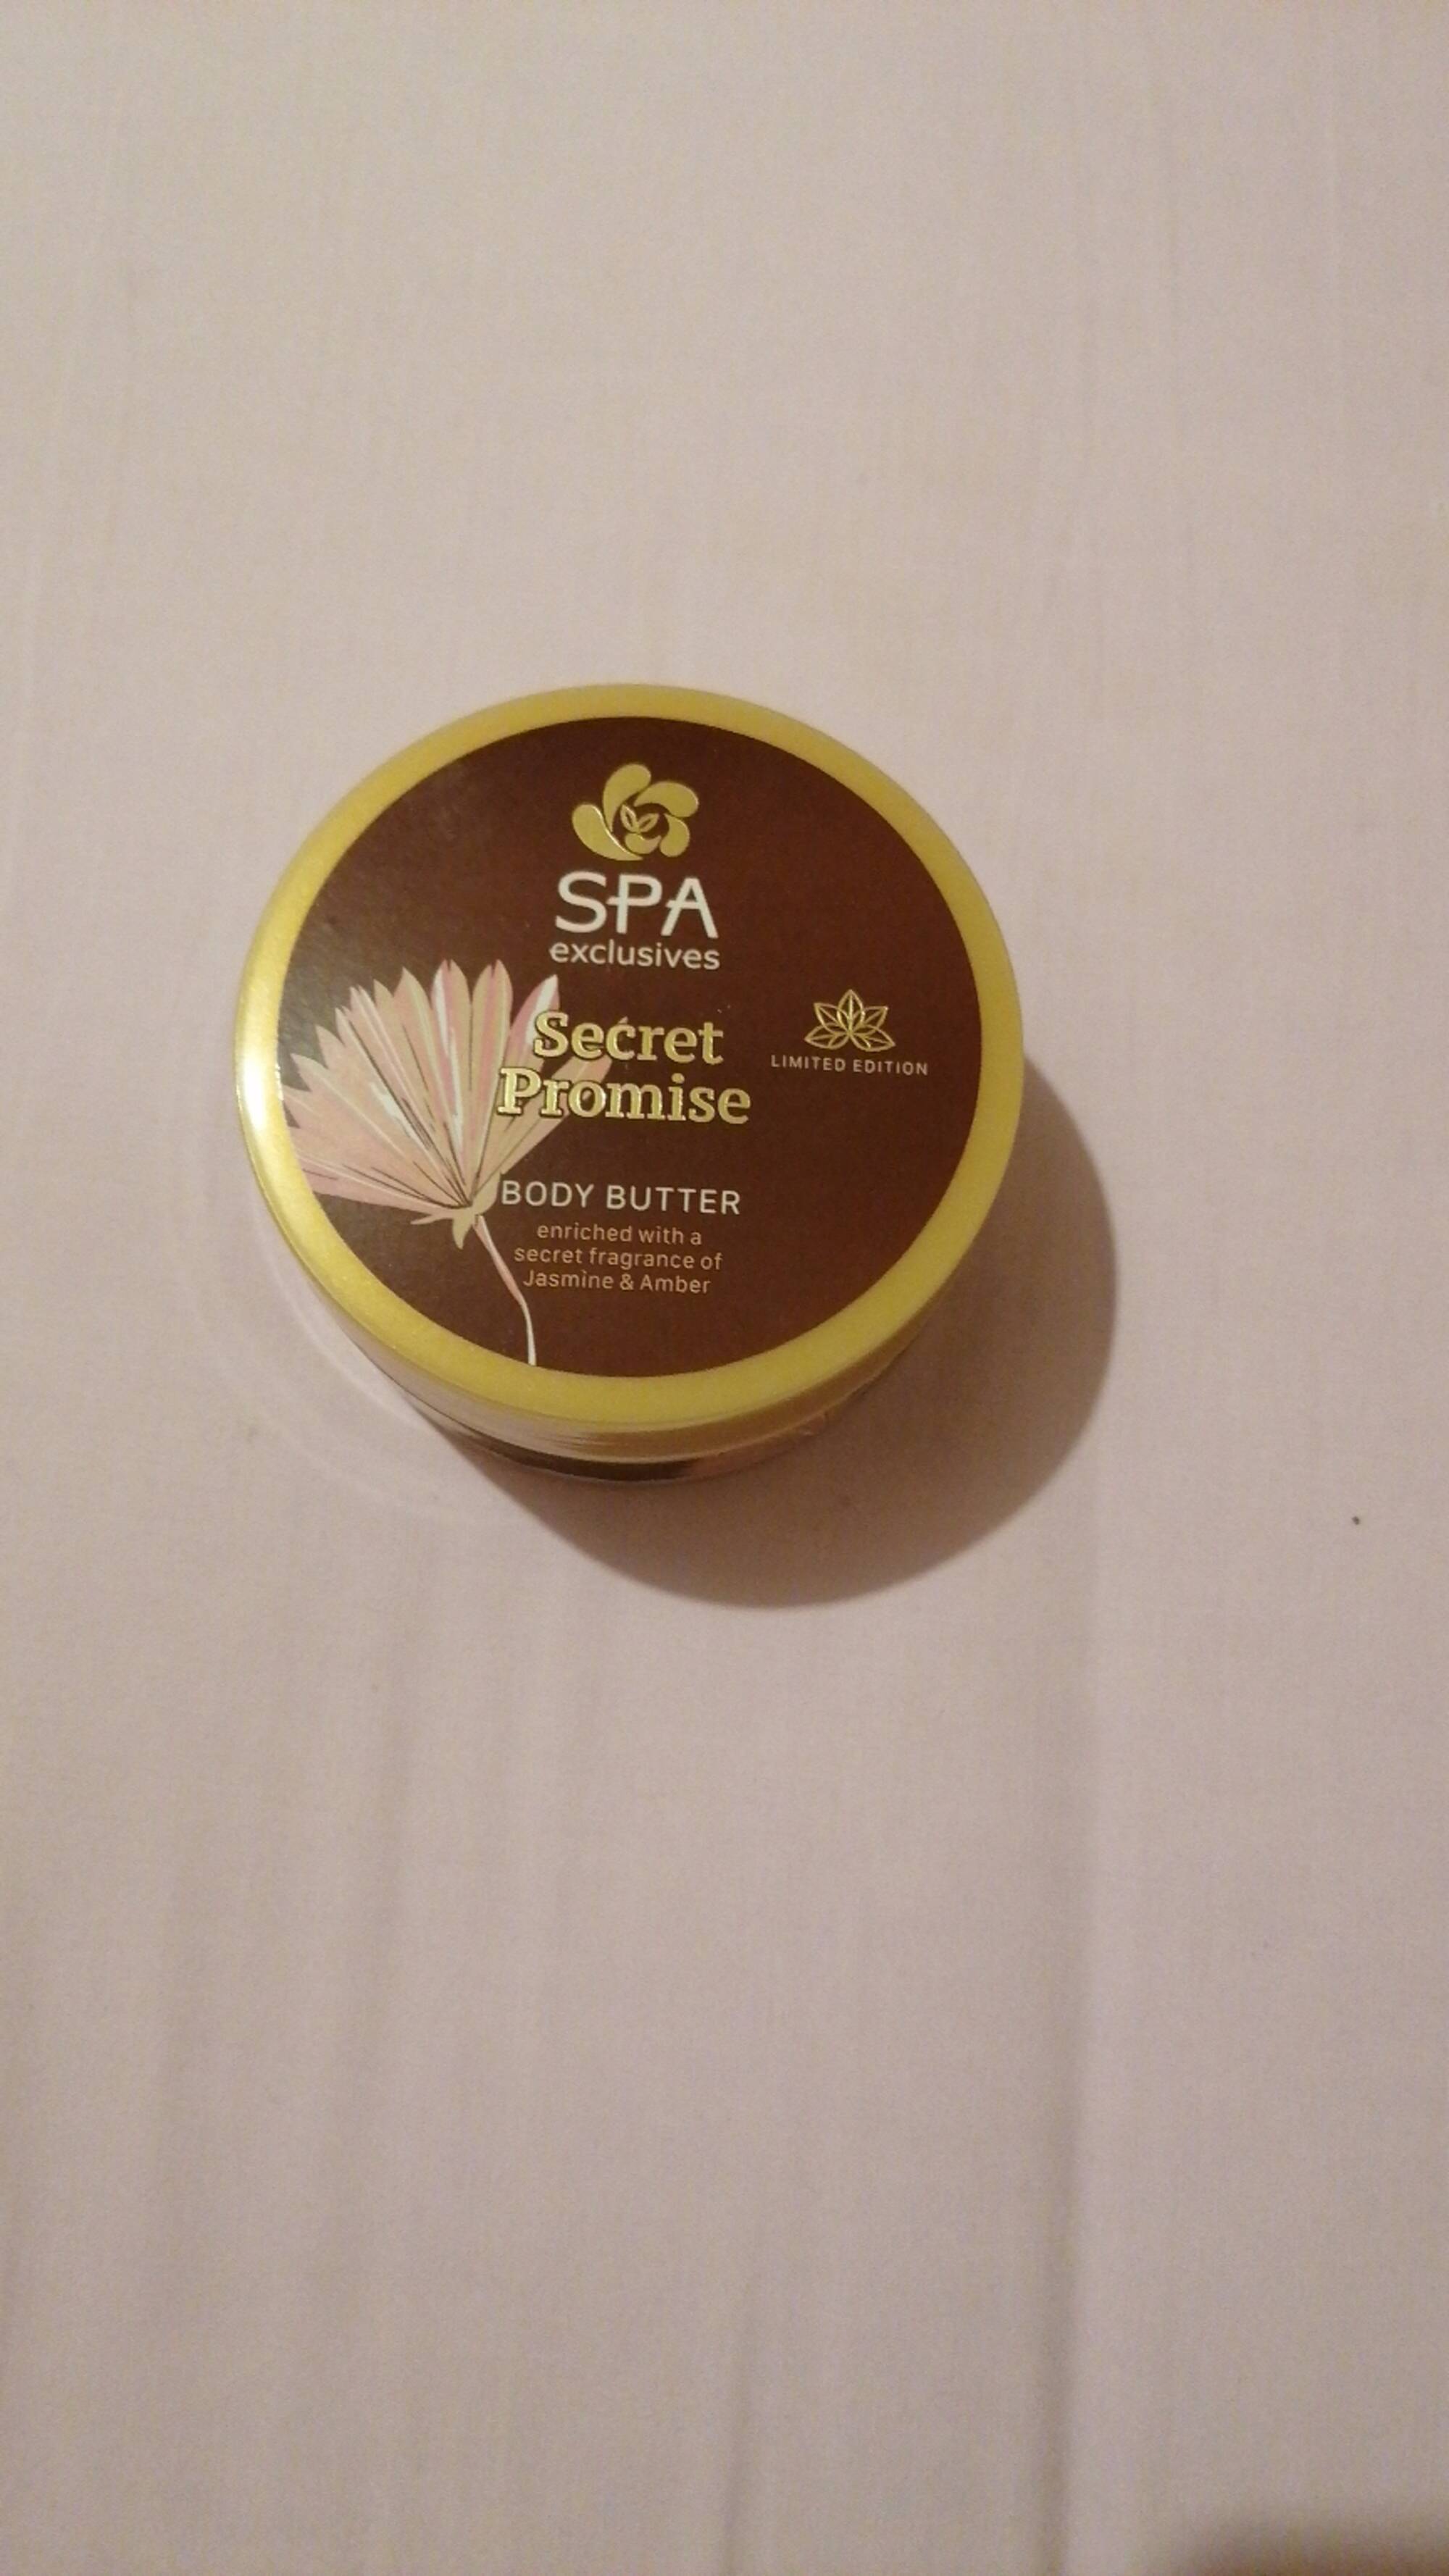 SPA EXCLUSIVES - Secret promise - Body butter